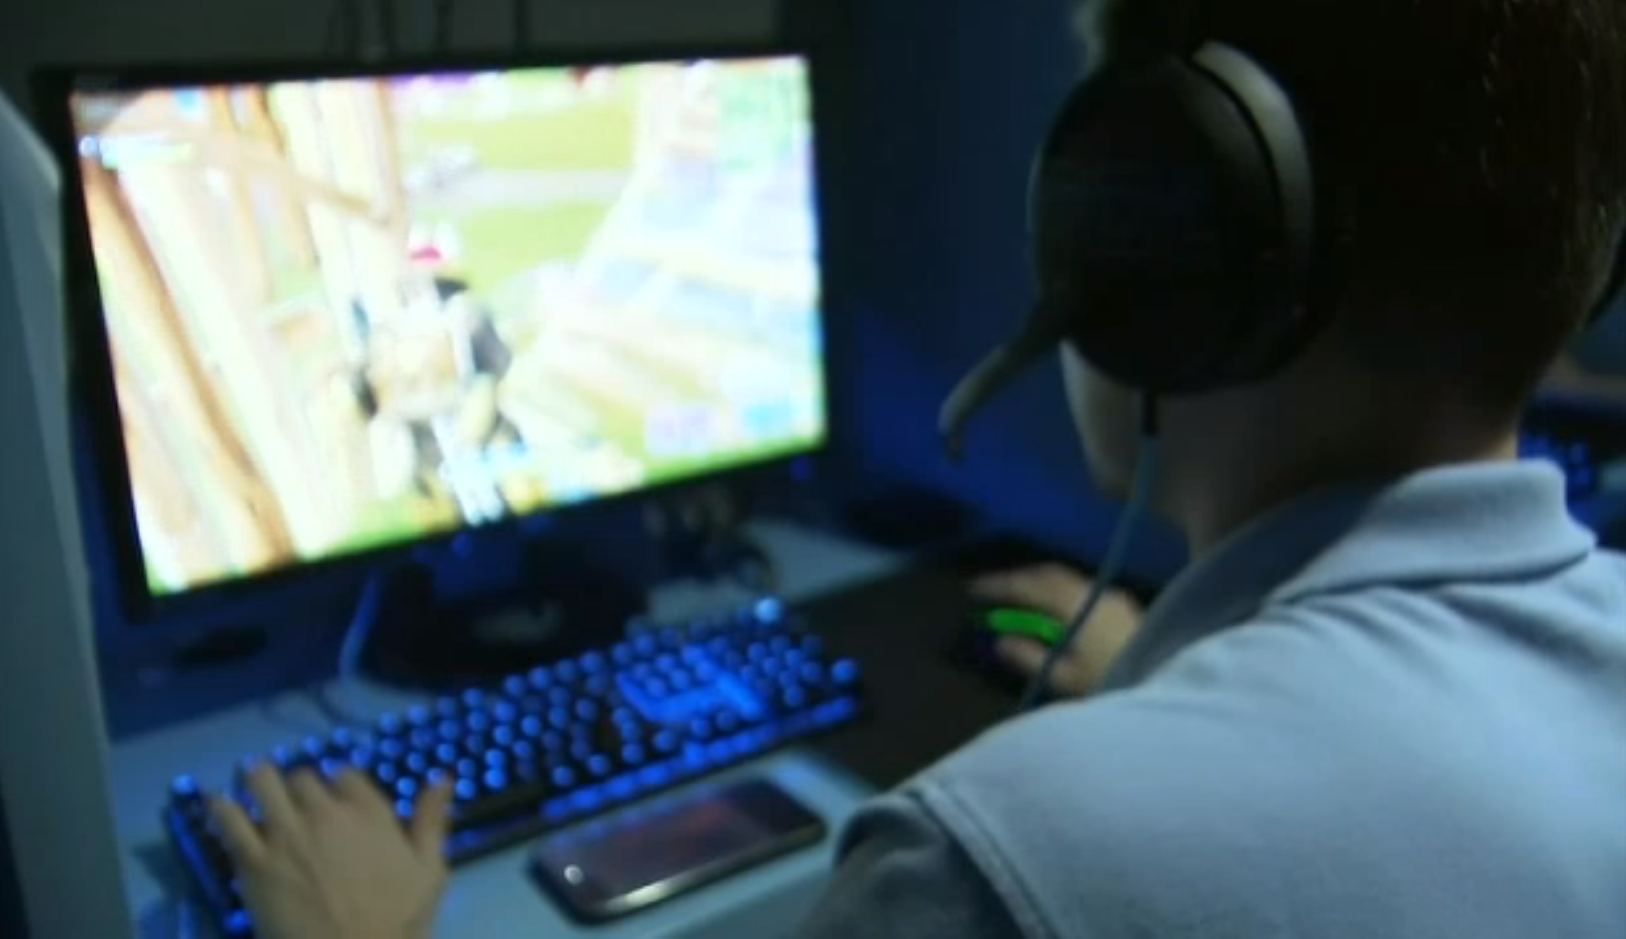 Top 'Live-Streamers' Get $50,000 an Hour to Play New Videogames Online - WSJ